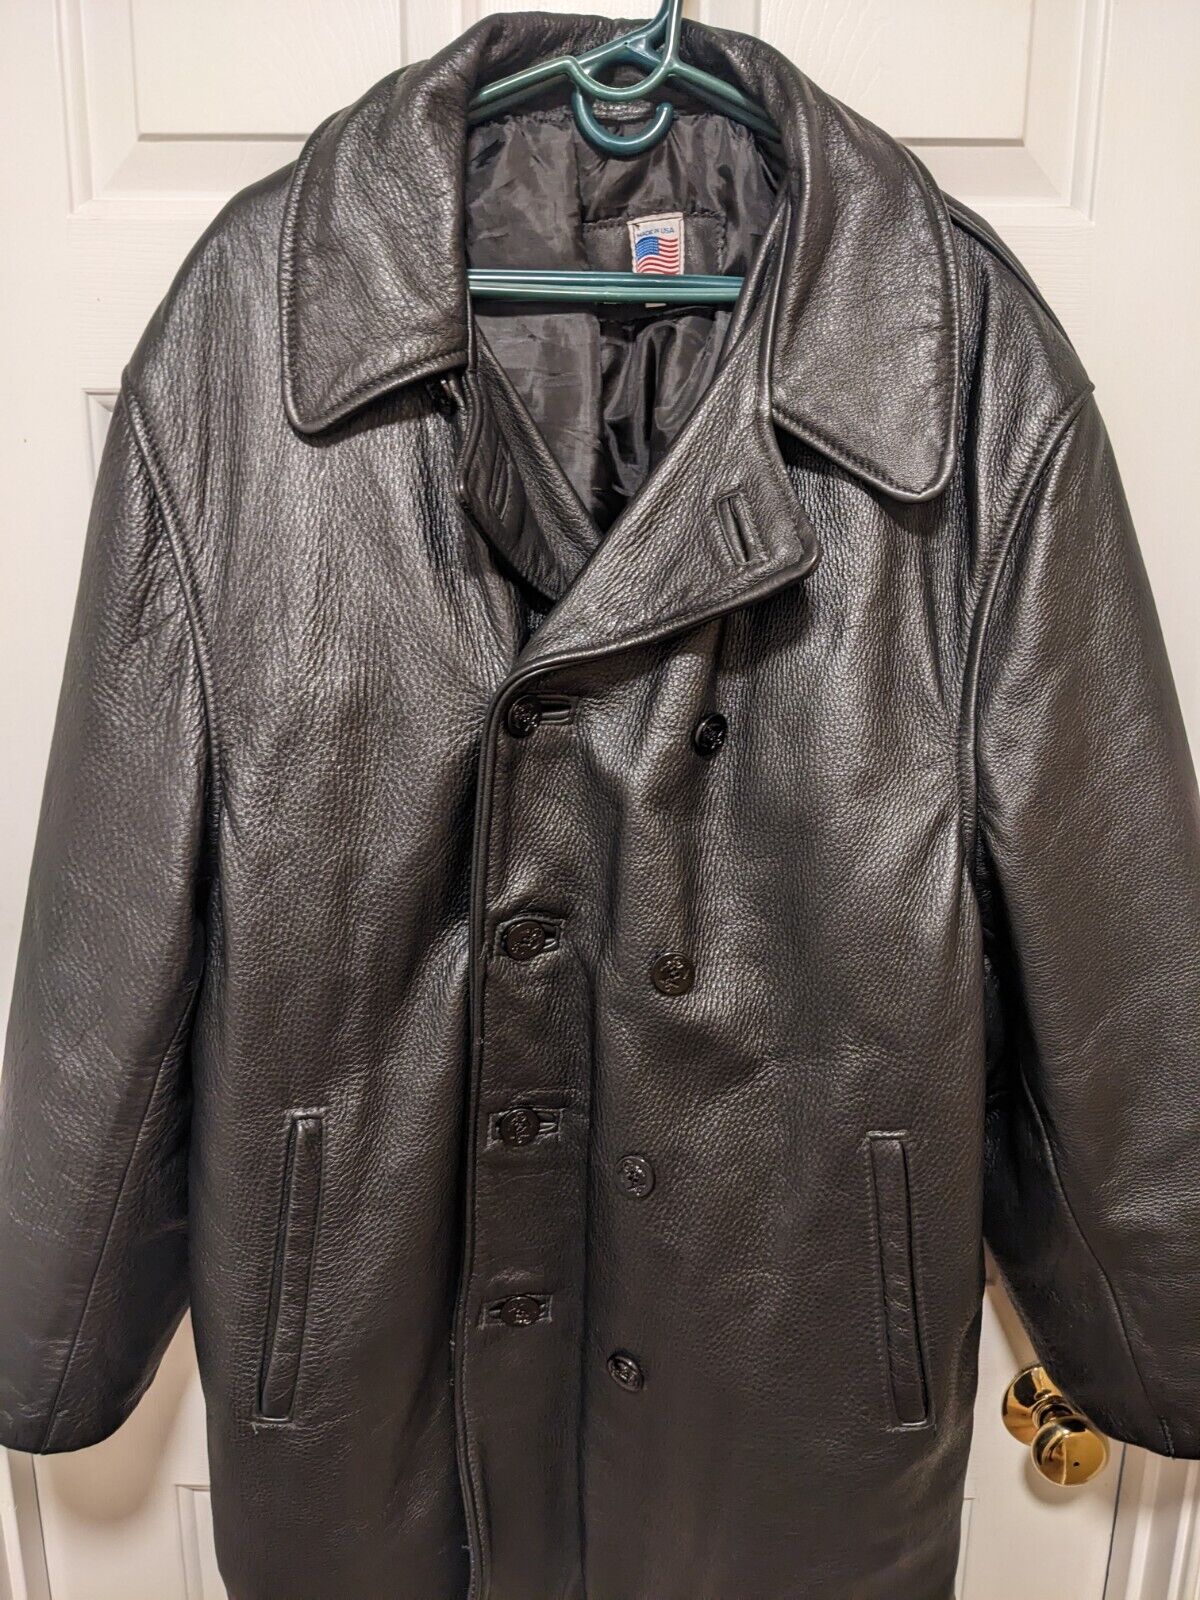 Finds and Deals - Leather Jacket Edition | Page 1145 | The Fedora Lounge